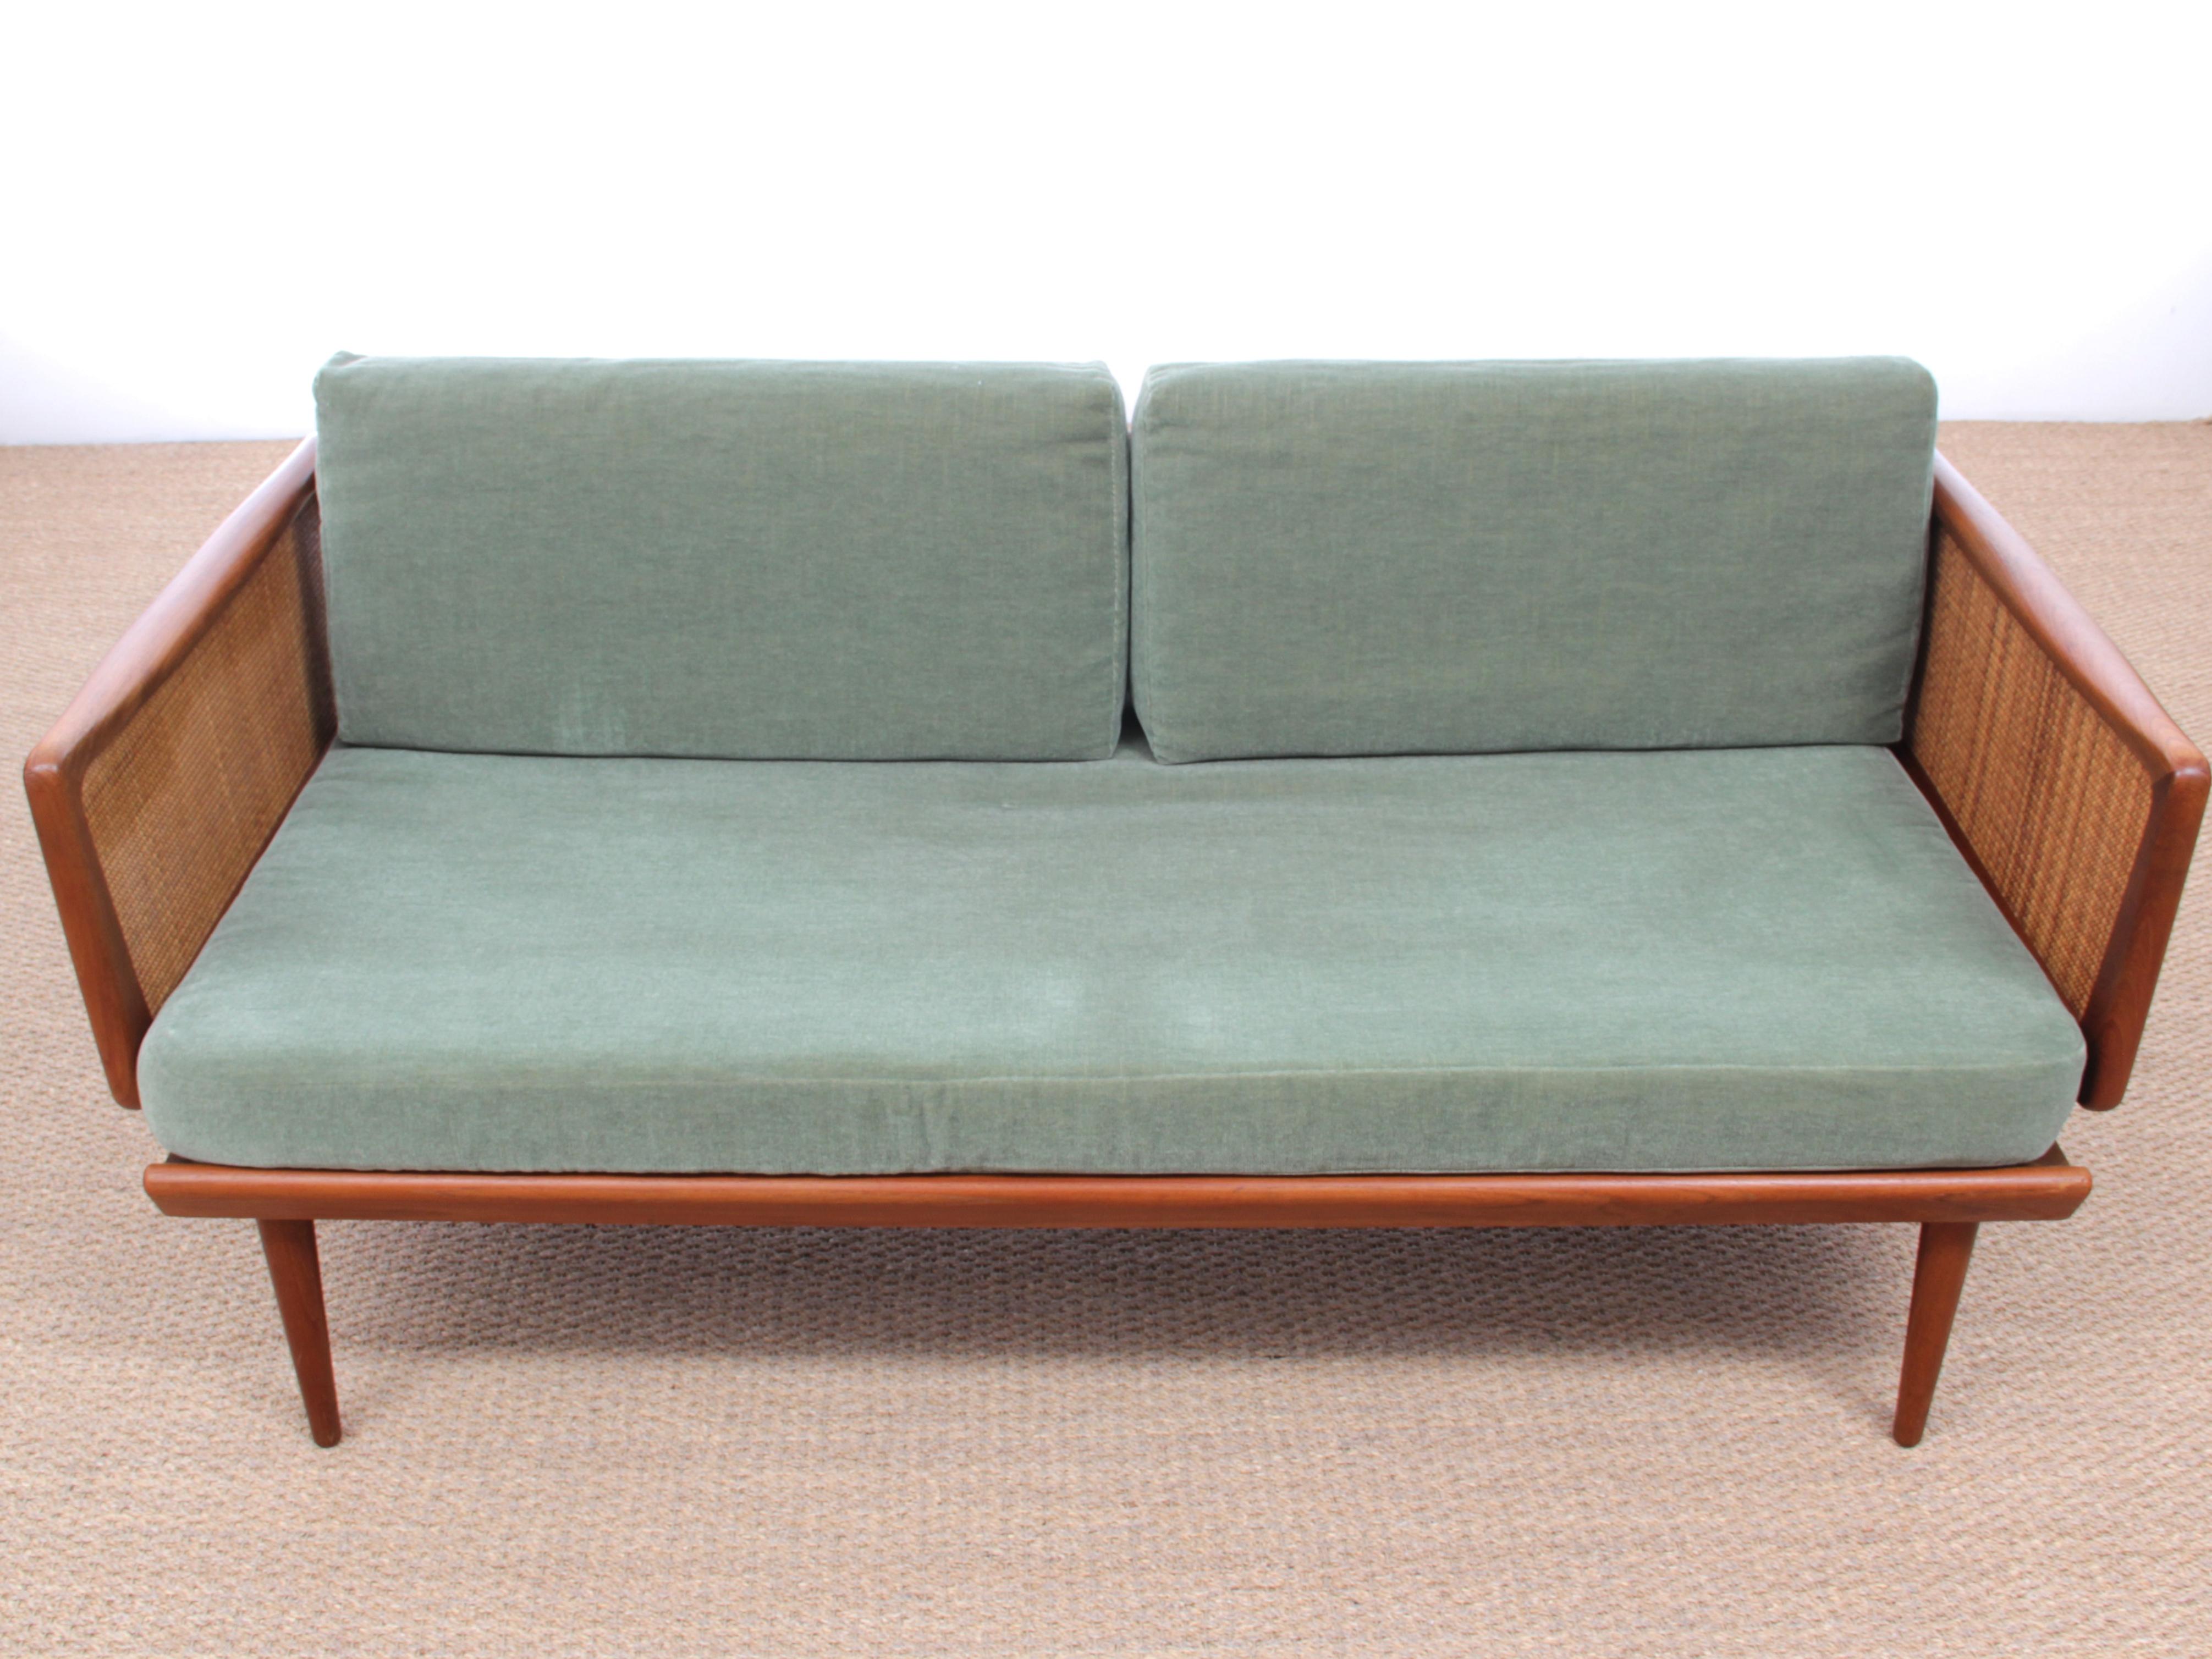 Mid-Century Modern Scandinavian sofa 2 seats FD451 by Peter Hvidty & Orla Mølgaard Nielsen for France and Søn. Teak and canne. Original cover in green velvet. Excellent condition. Referenced by the Design Museum Denmark under number RP15815.